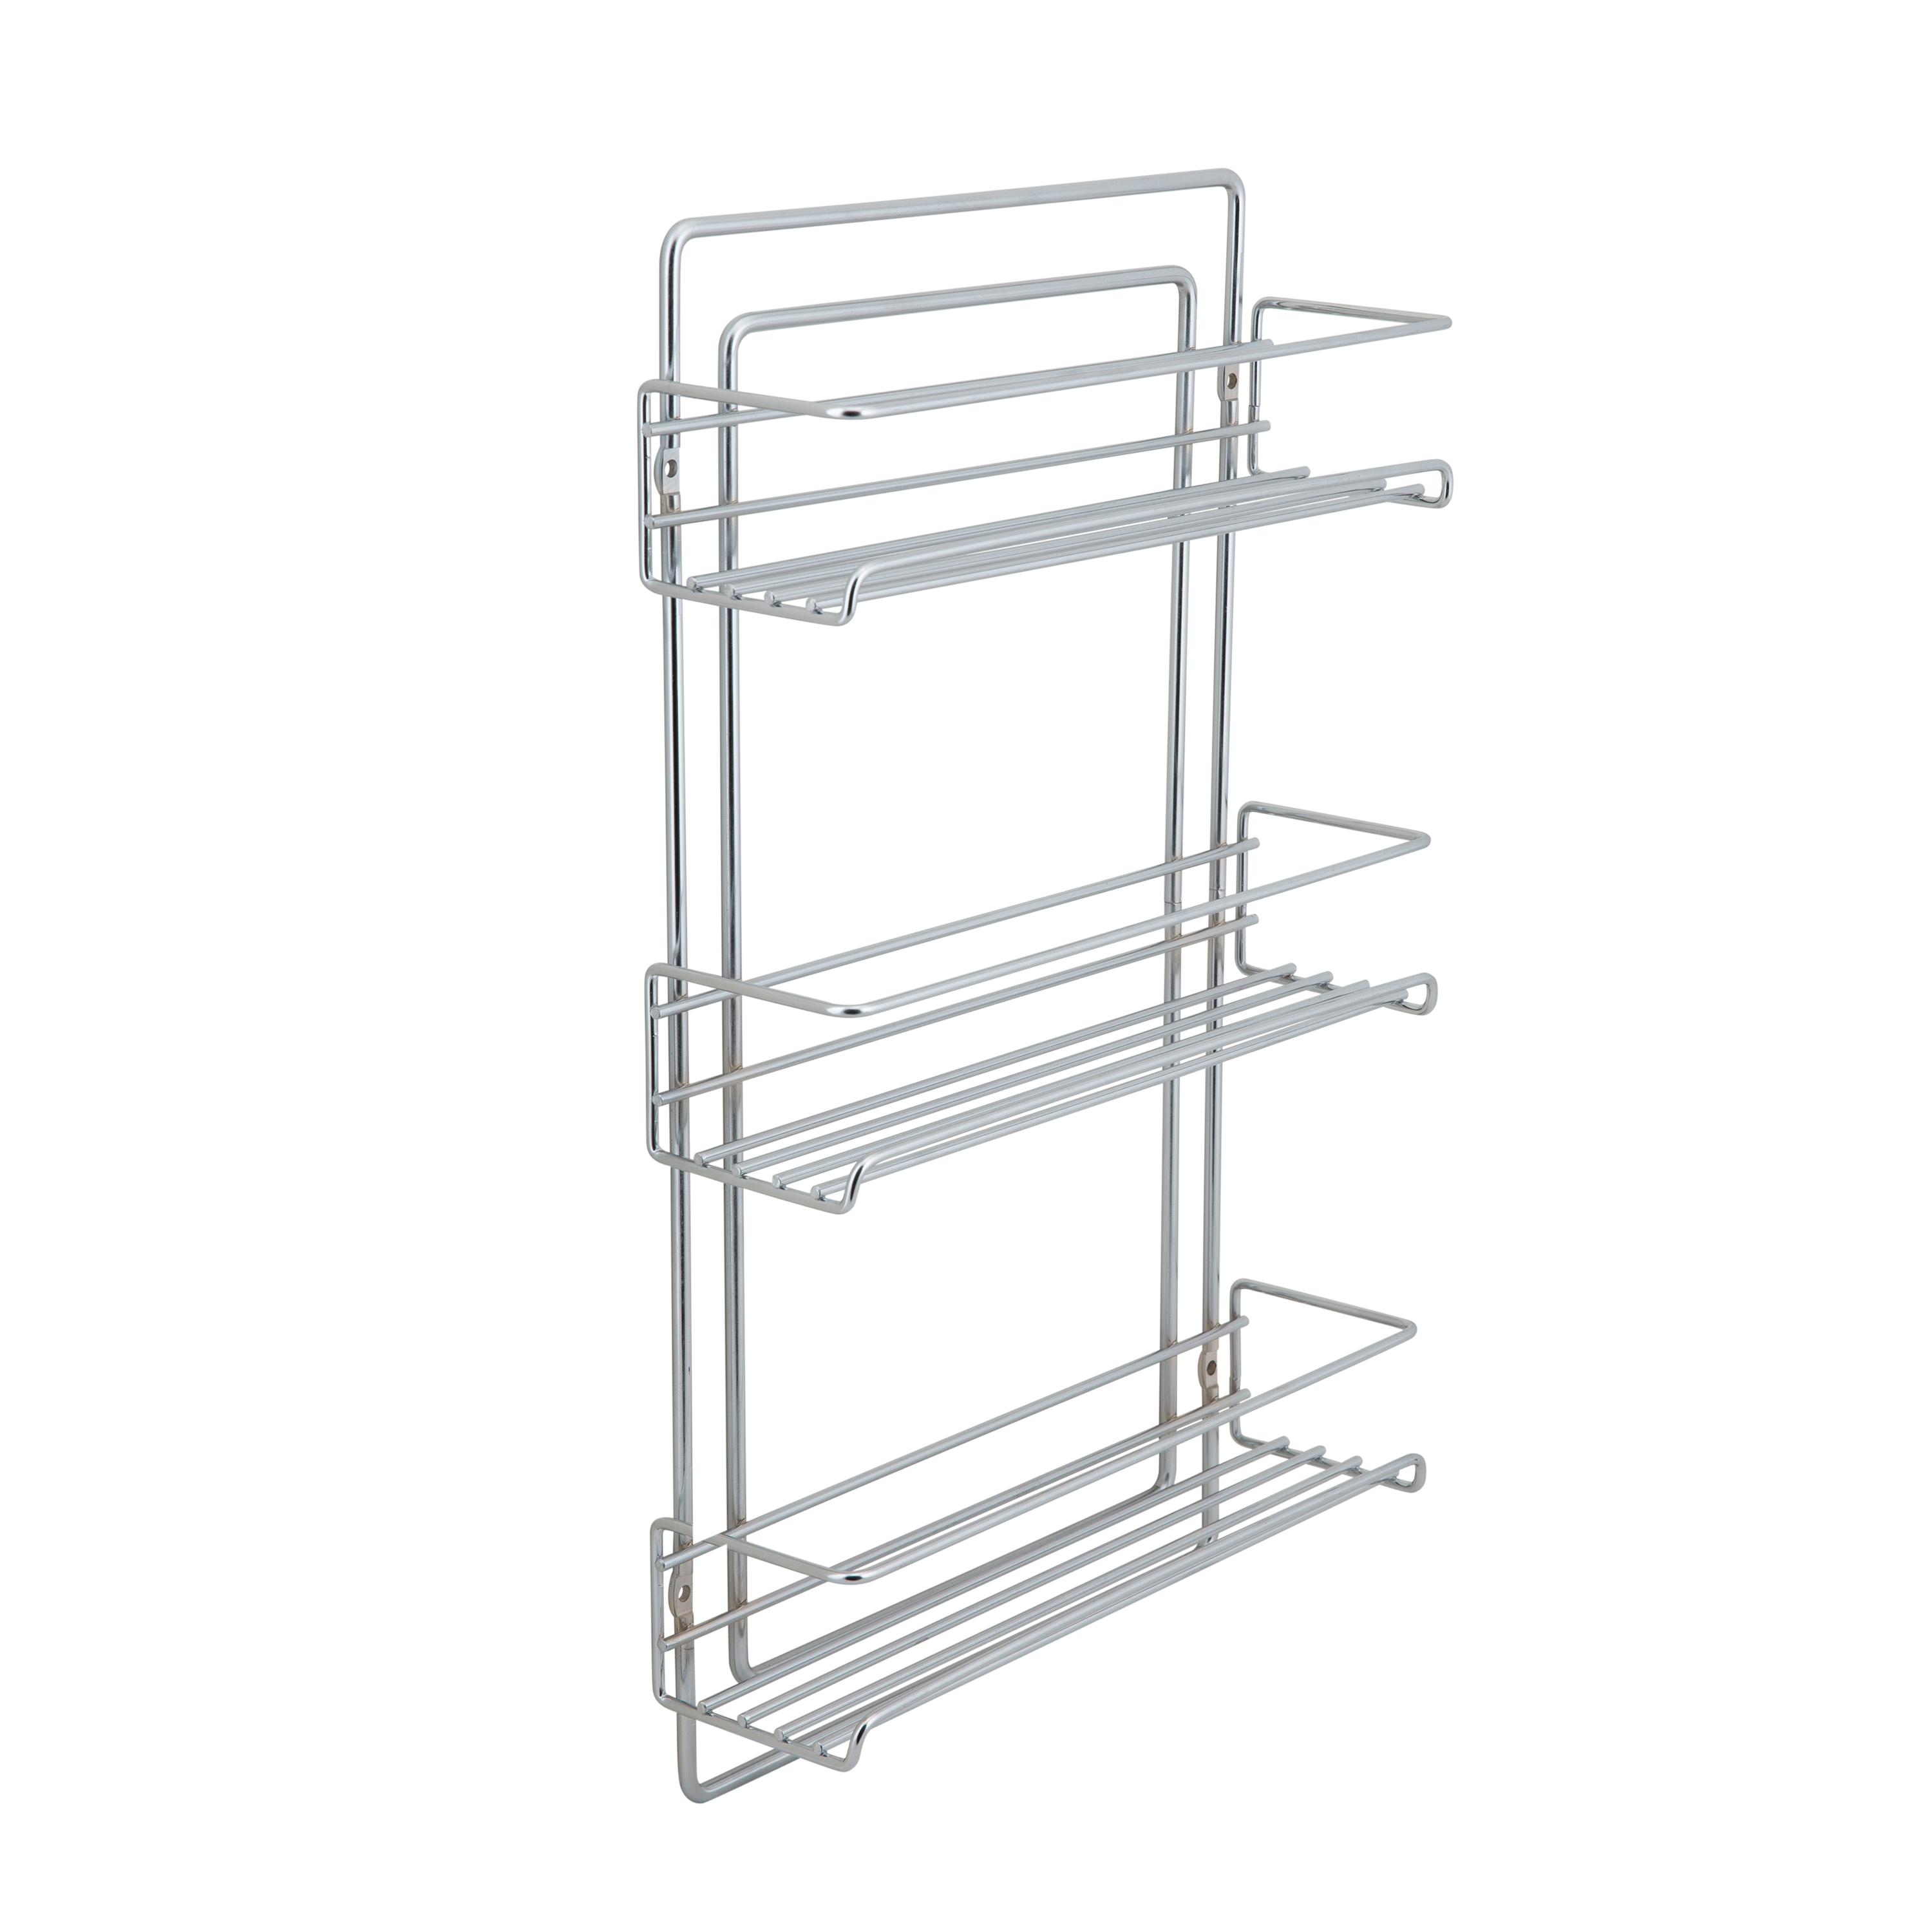 Organize It All 3 Tier Wall Mountable Spice Rack in Chrome - image 1 of 6